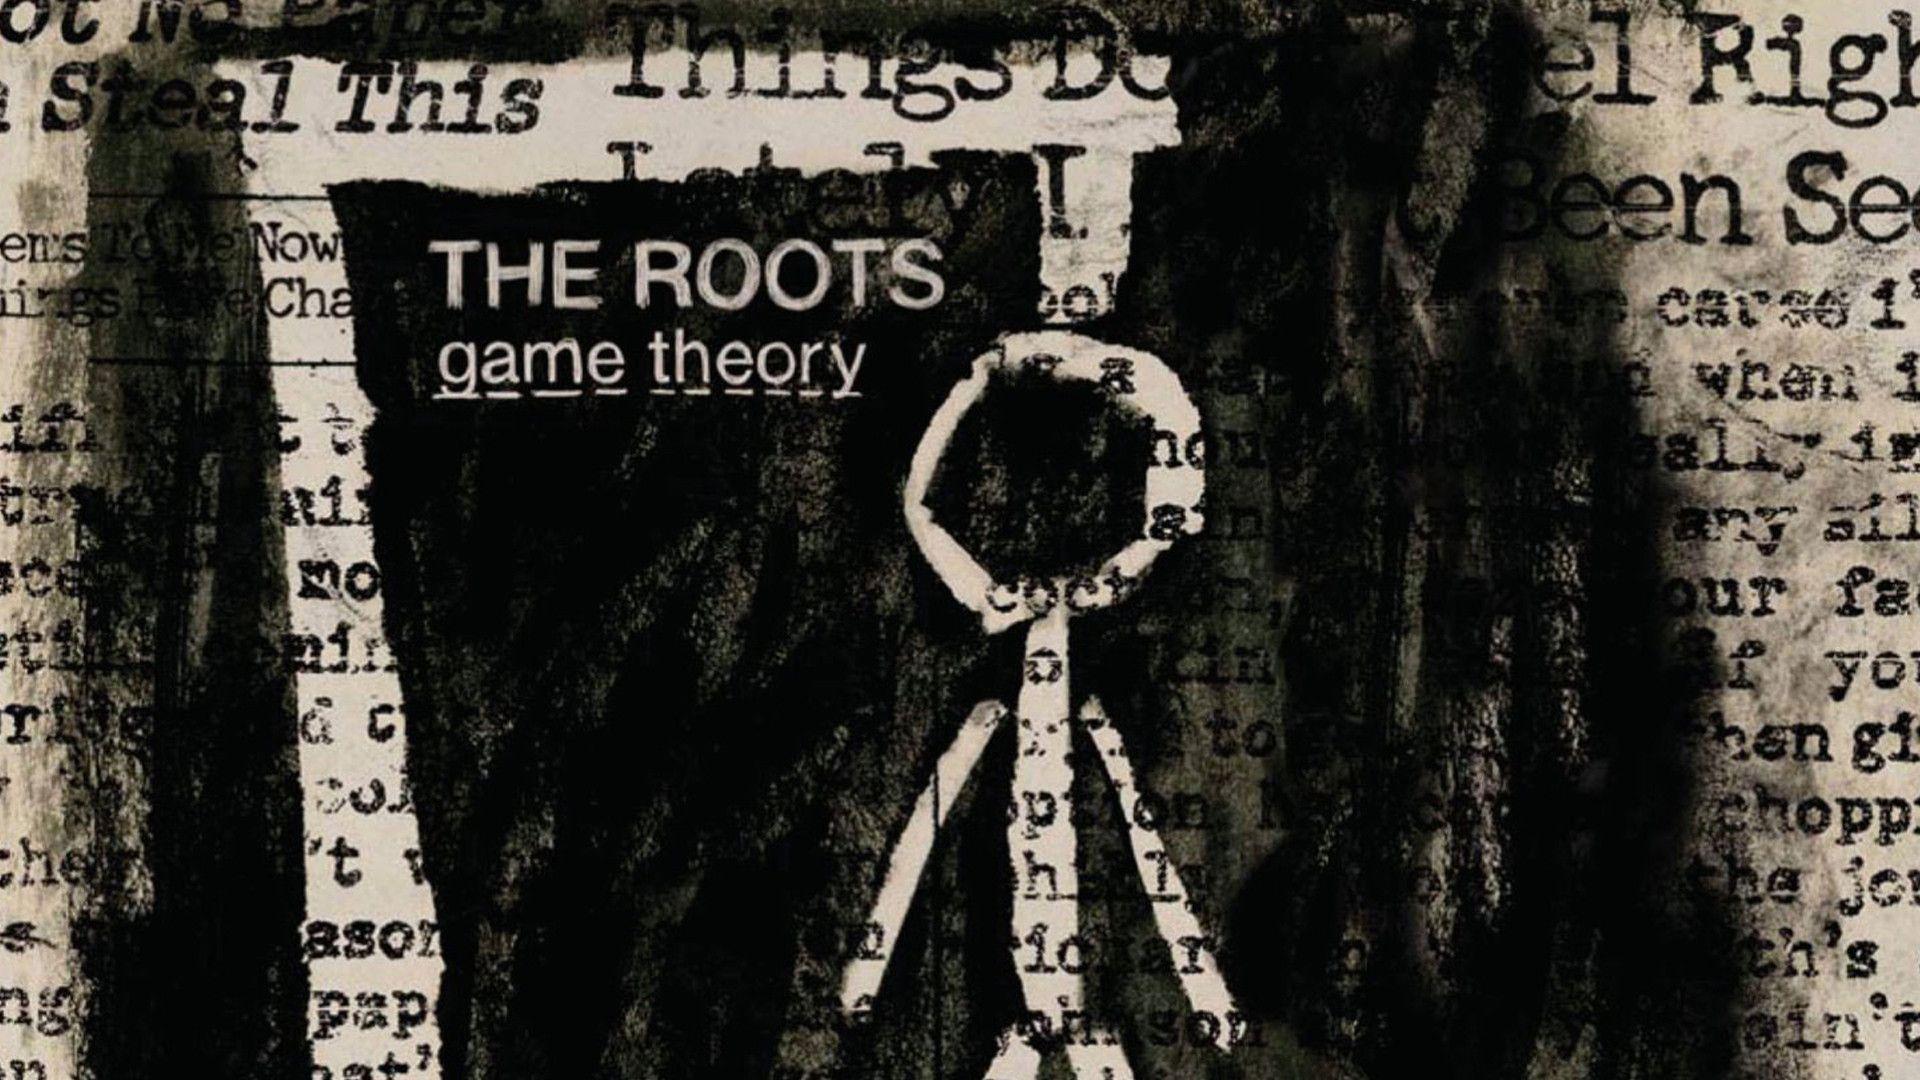 1920x1080] [The Roots] Game Theory